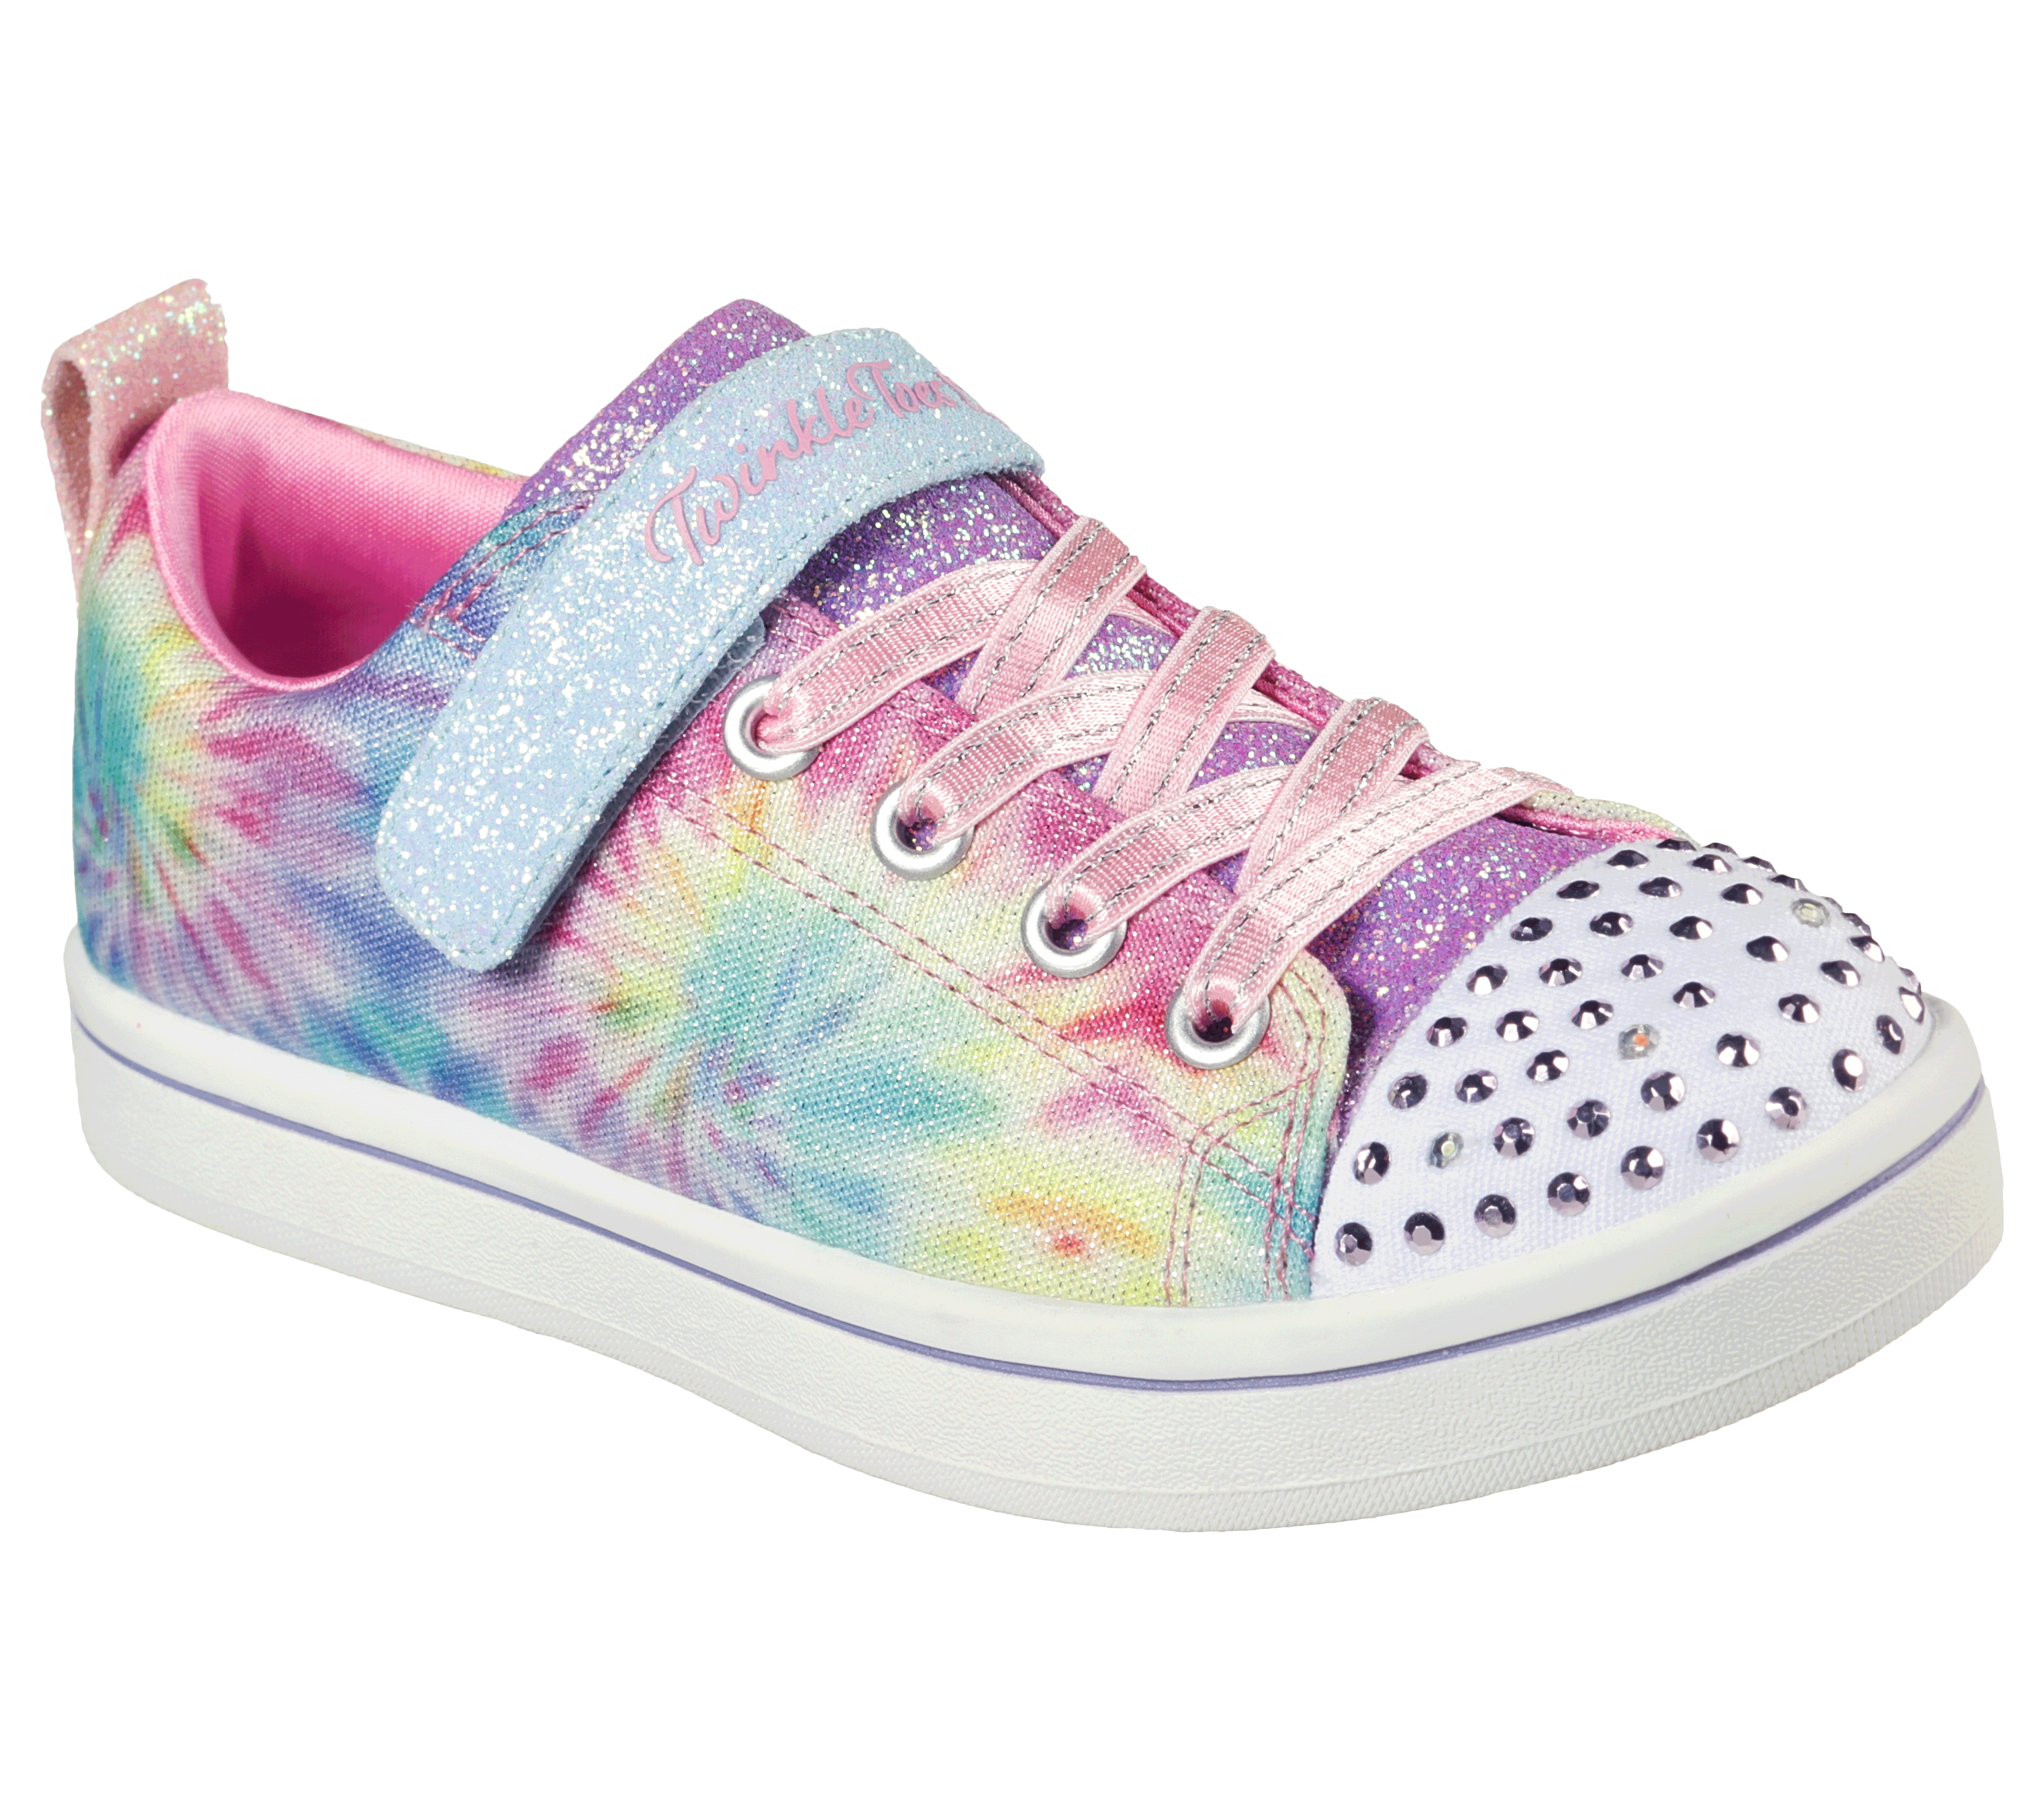 Shop the Twinkle Toes: Sparkle Rayz 